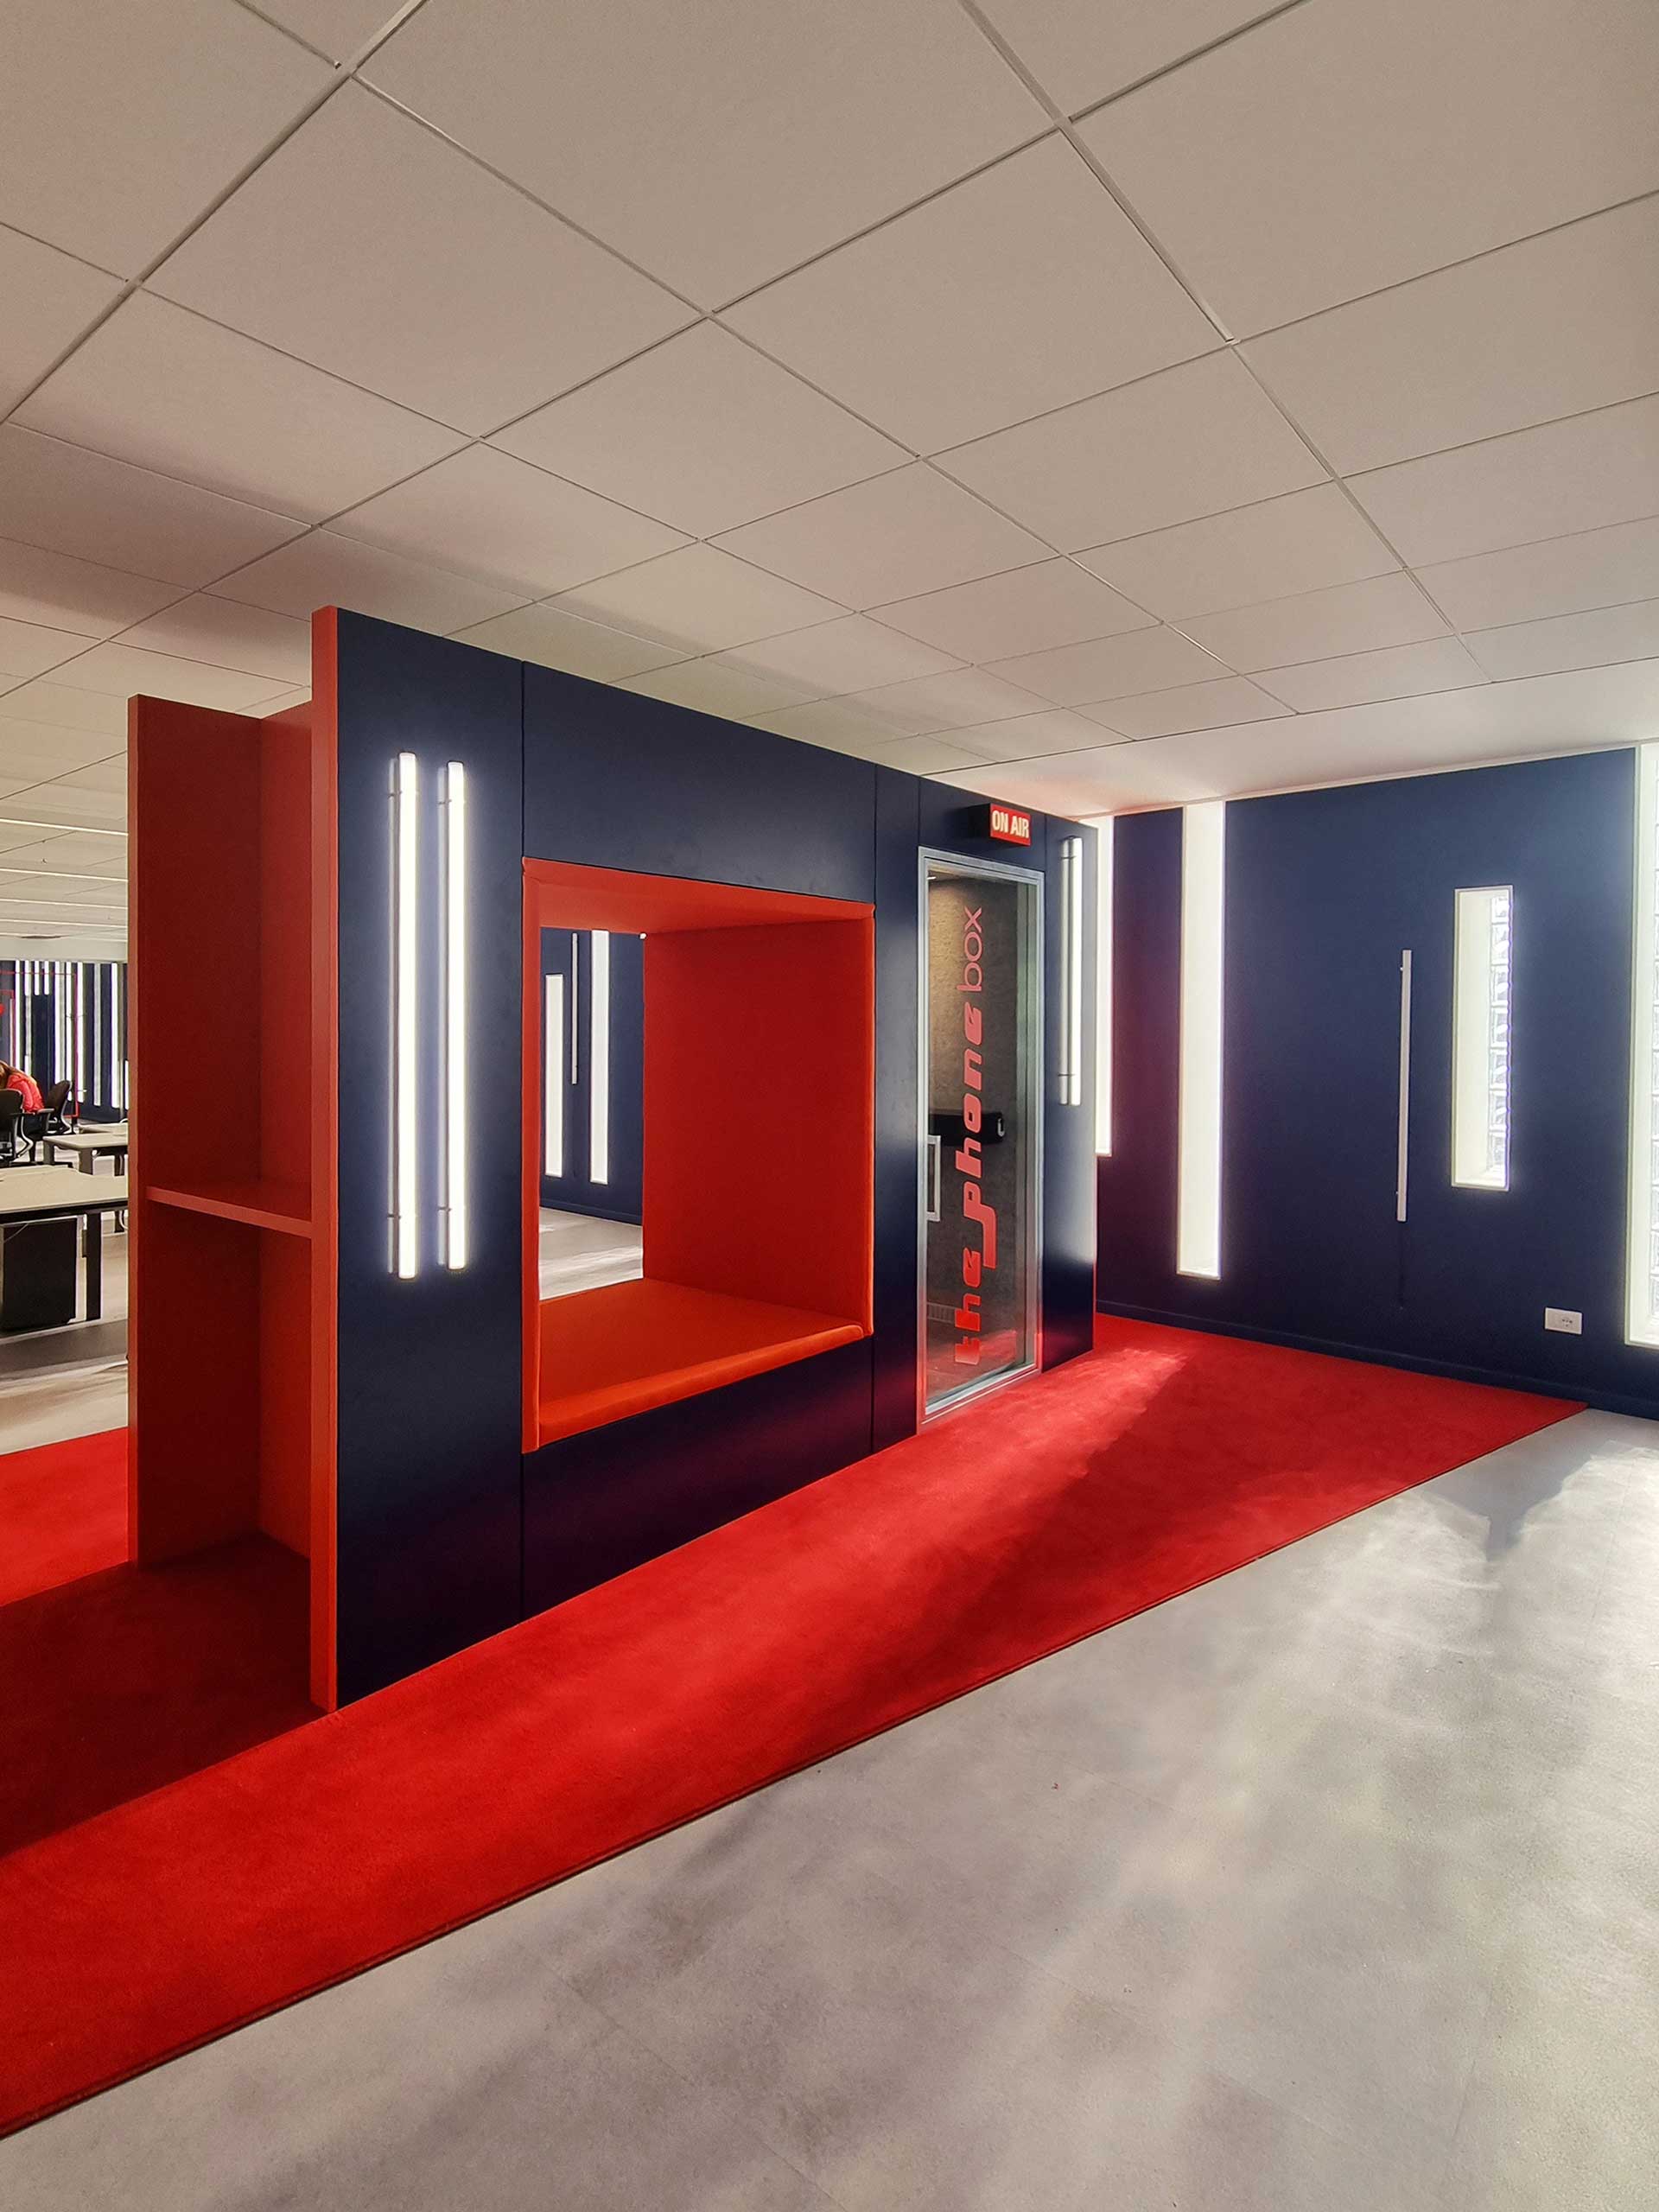 place-phone-booth-randstad-box-level-office-landscape